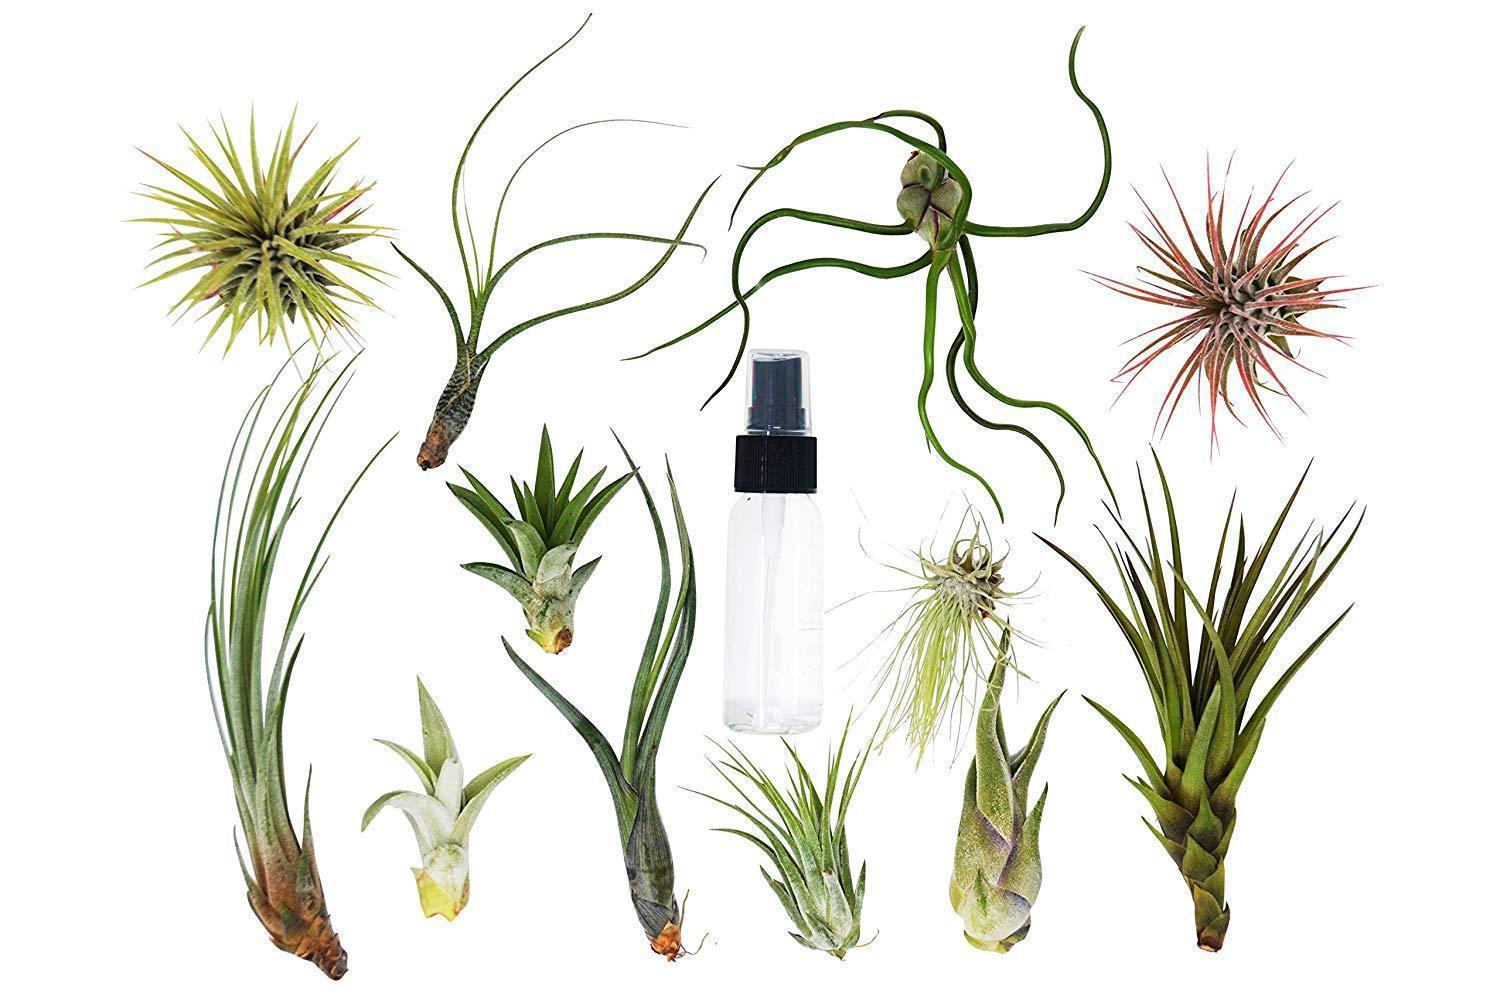 A variety of air plants displayed on a clean white background.